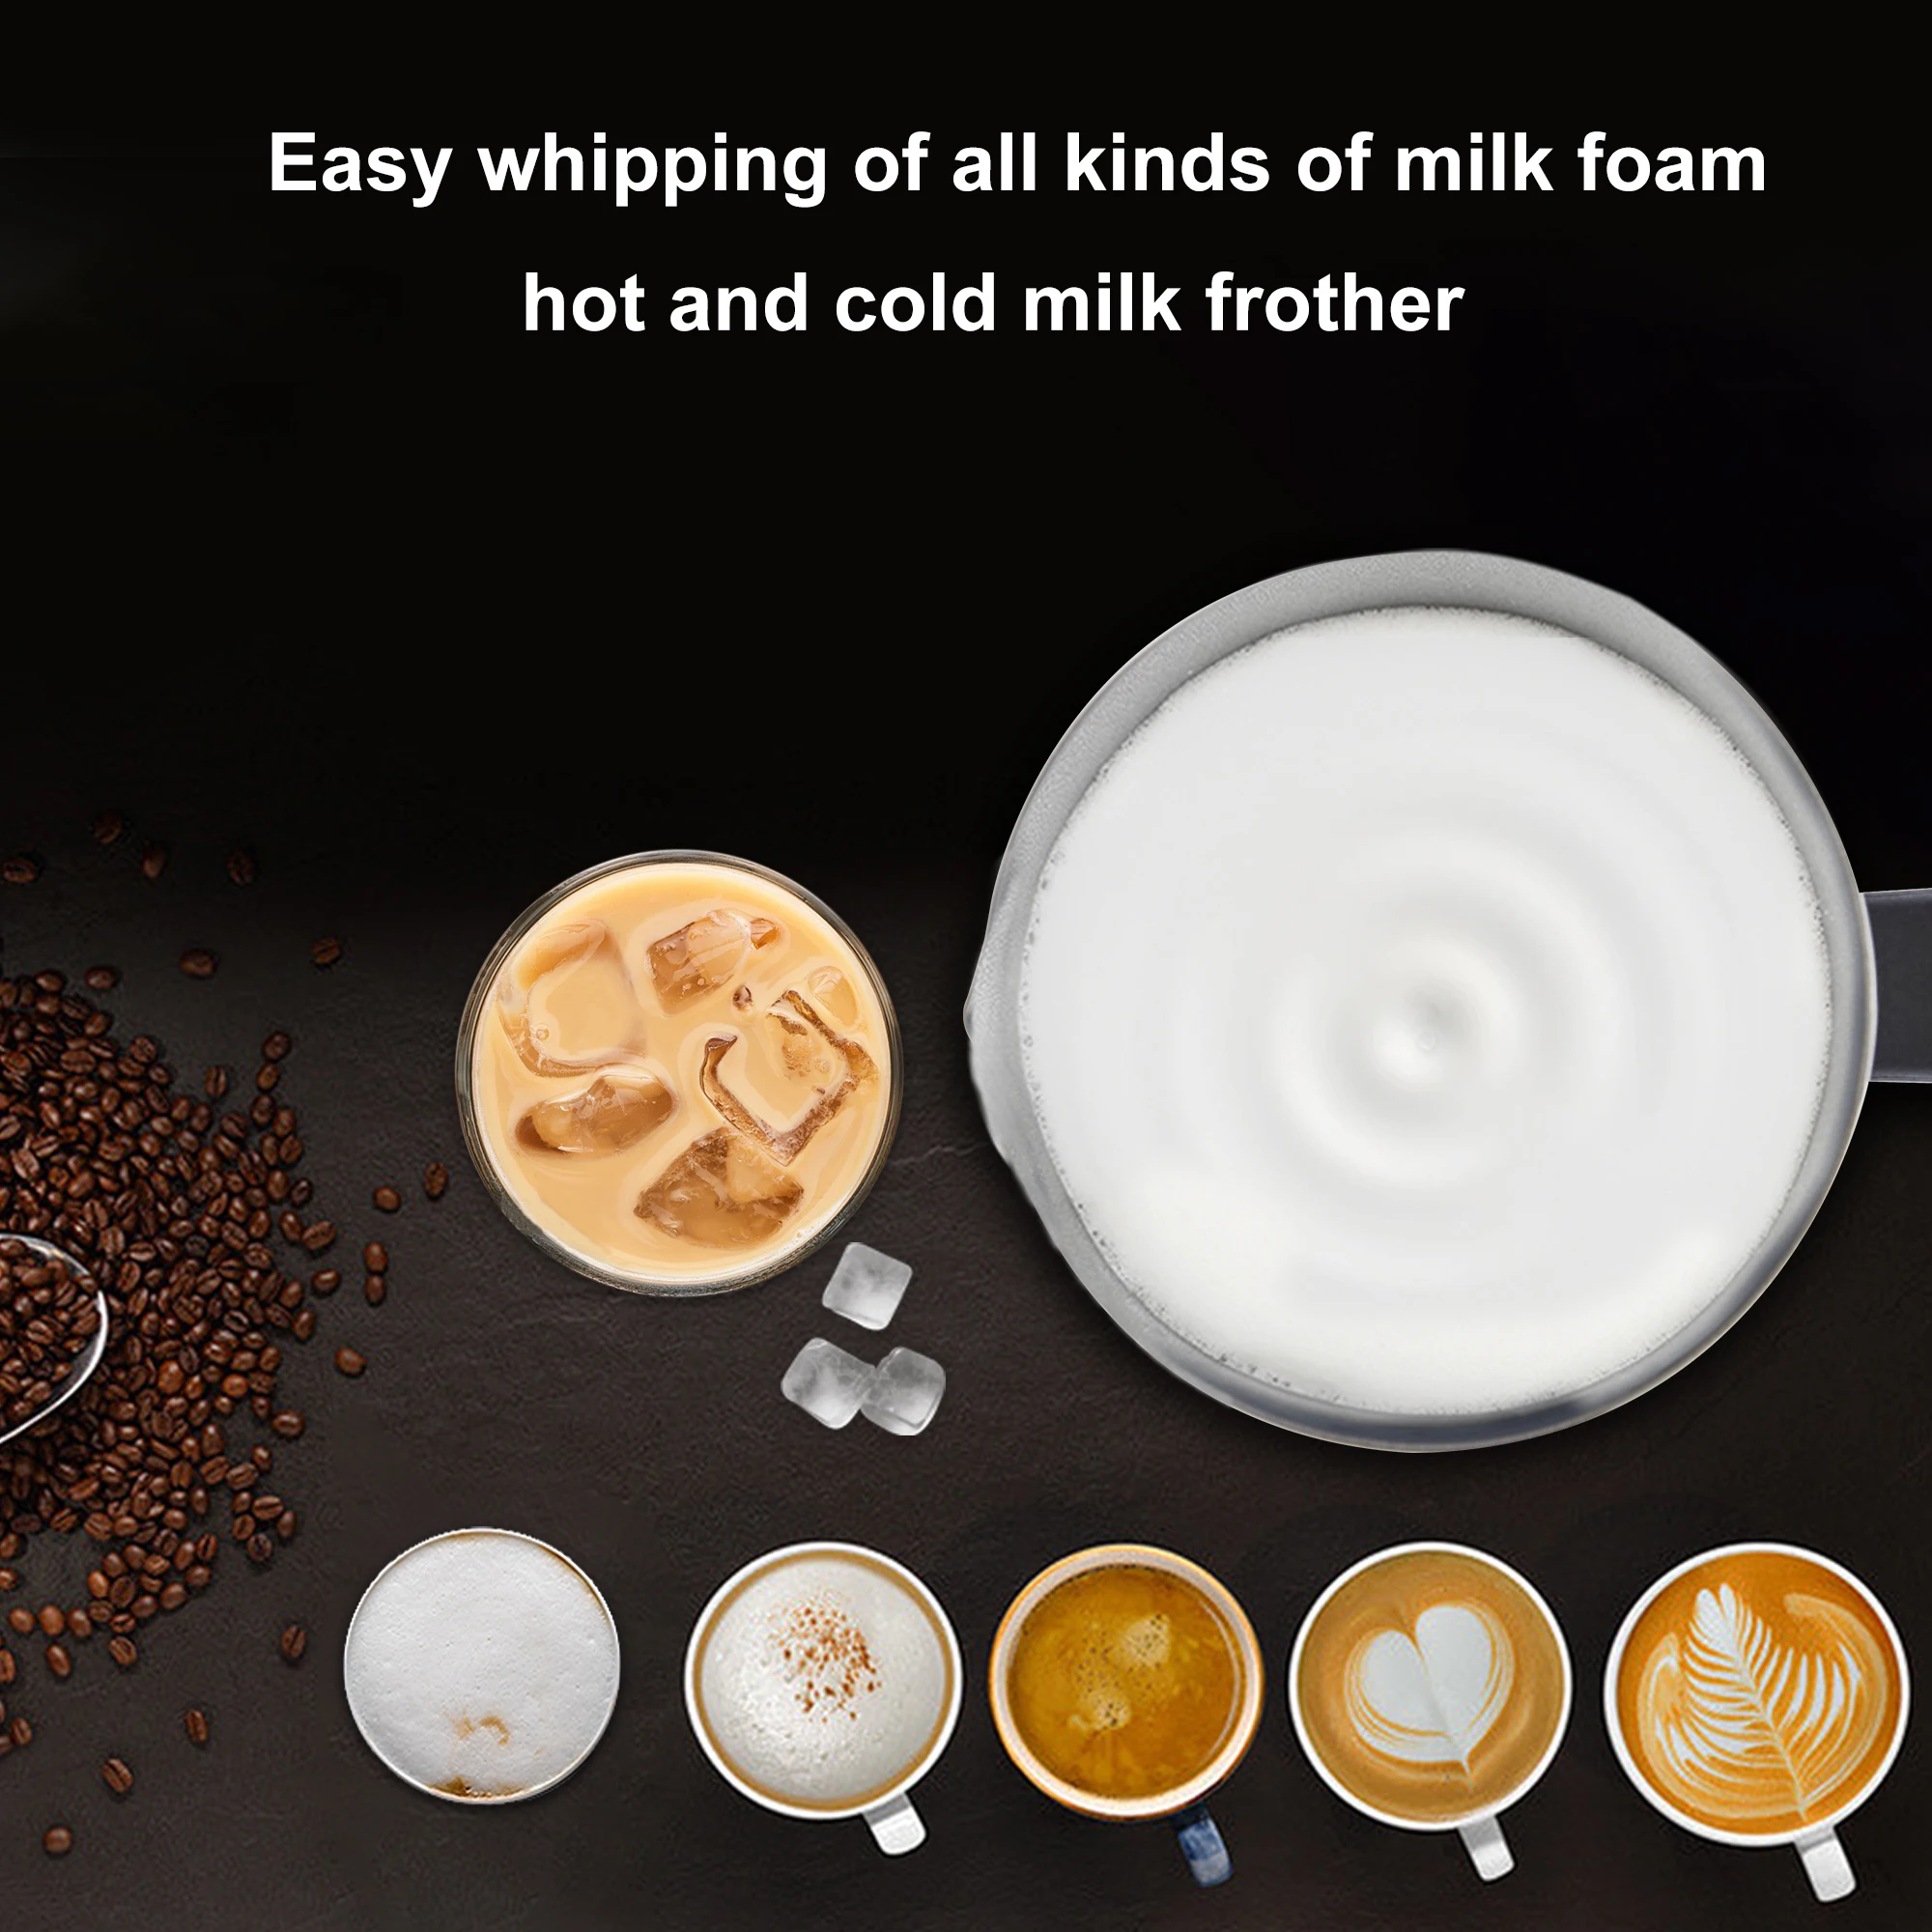 BioloMix Upgraded 4 in 1 Coffee Milk Frother Frothing Foamer Automatic Milk Warmer Cold/Hot Latte Cappuccino Chocolate enlarge